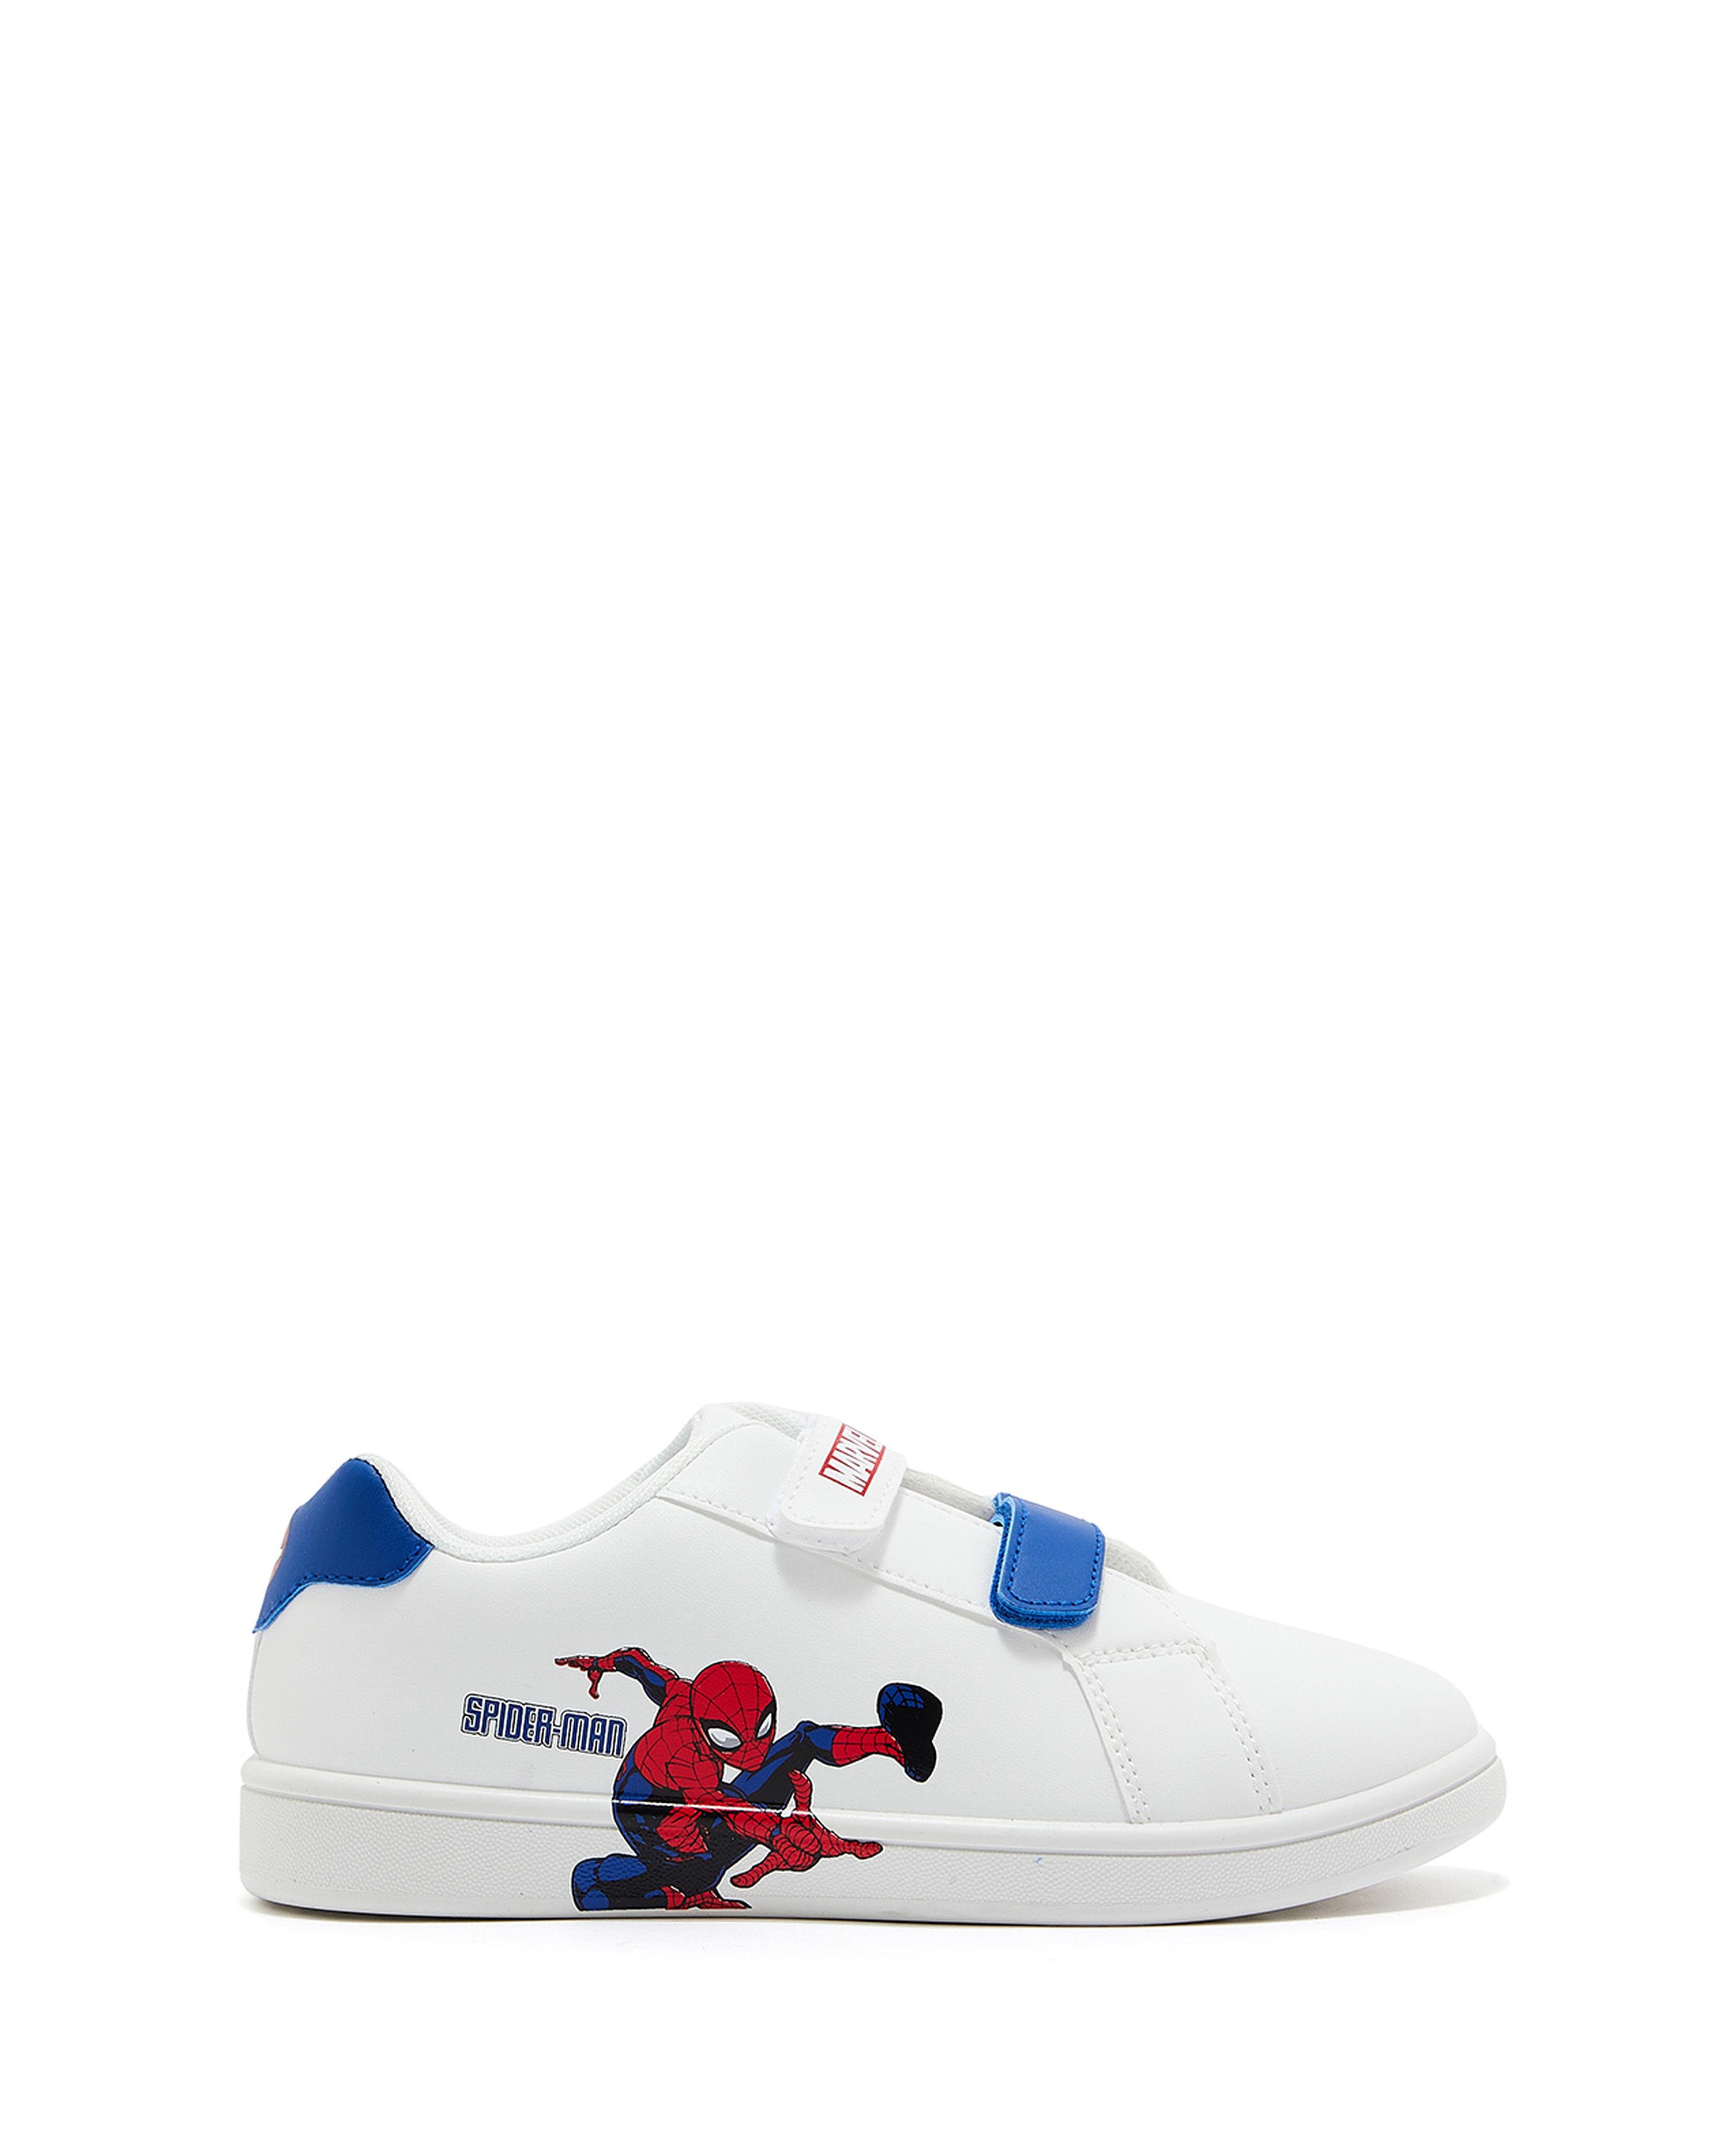 Spider-Man Velcro Shoes